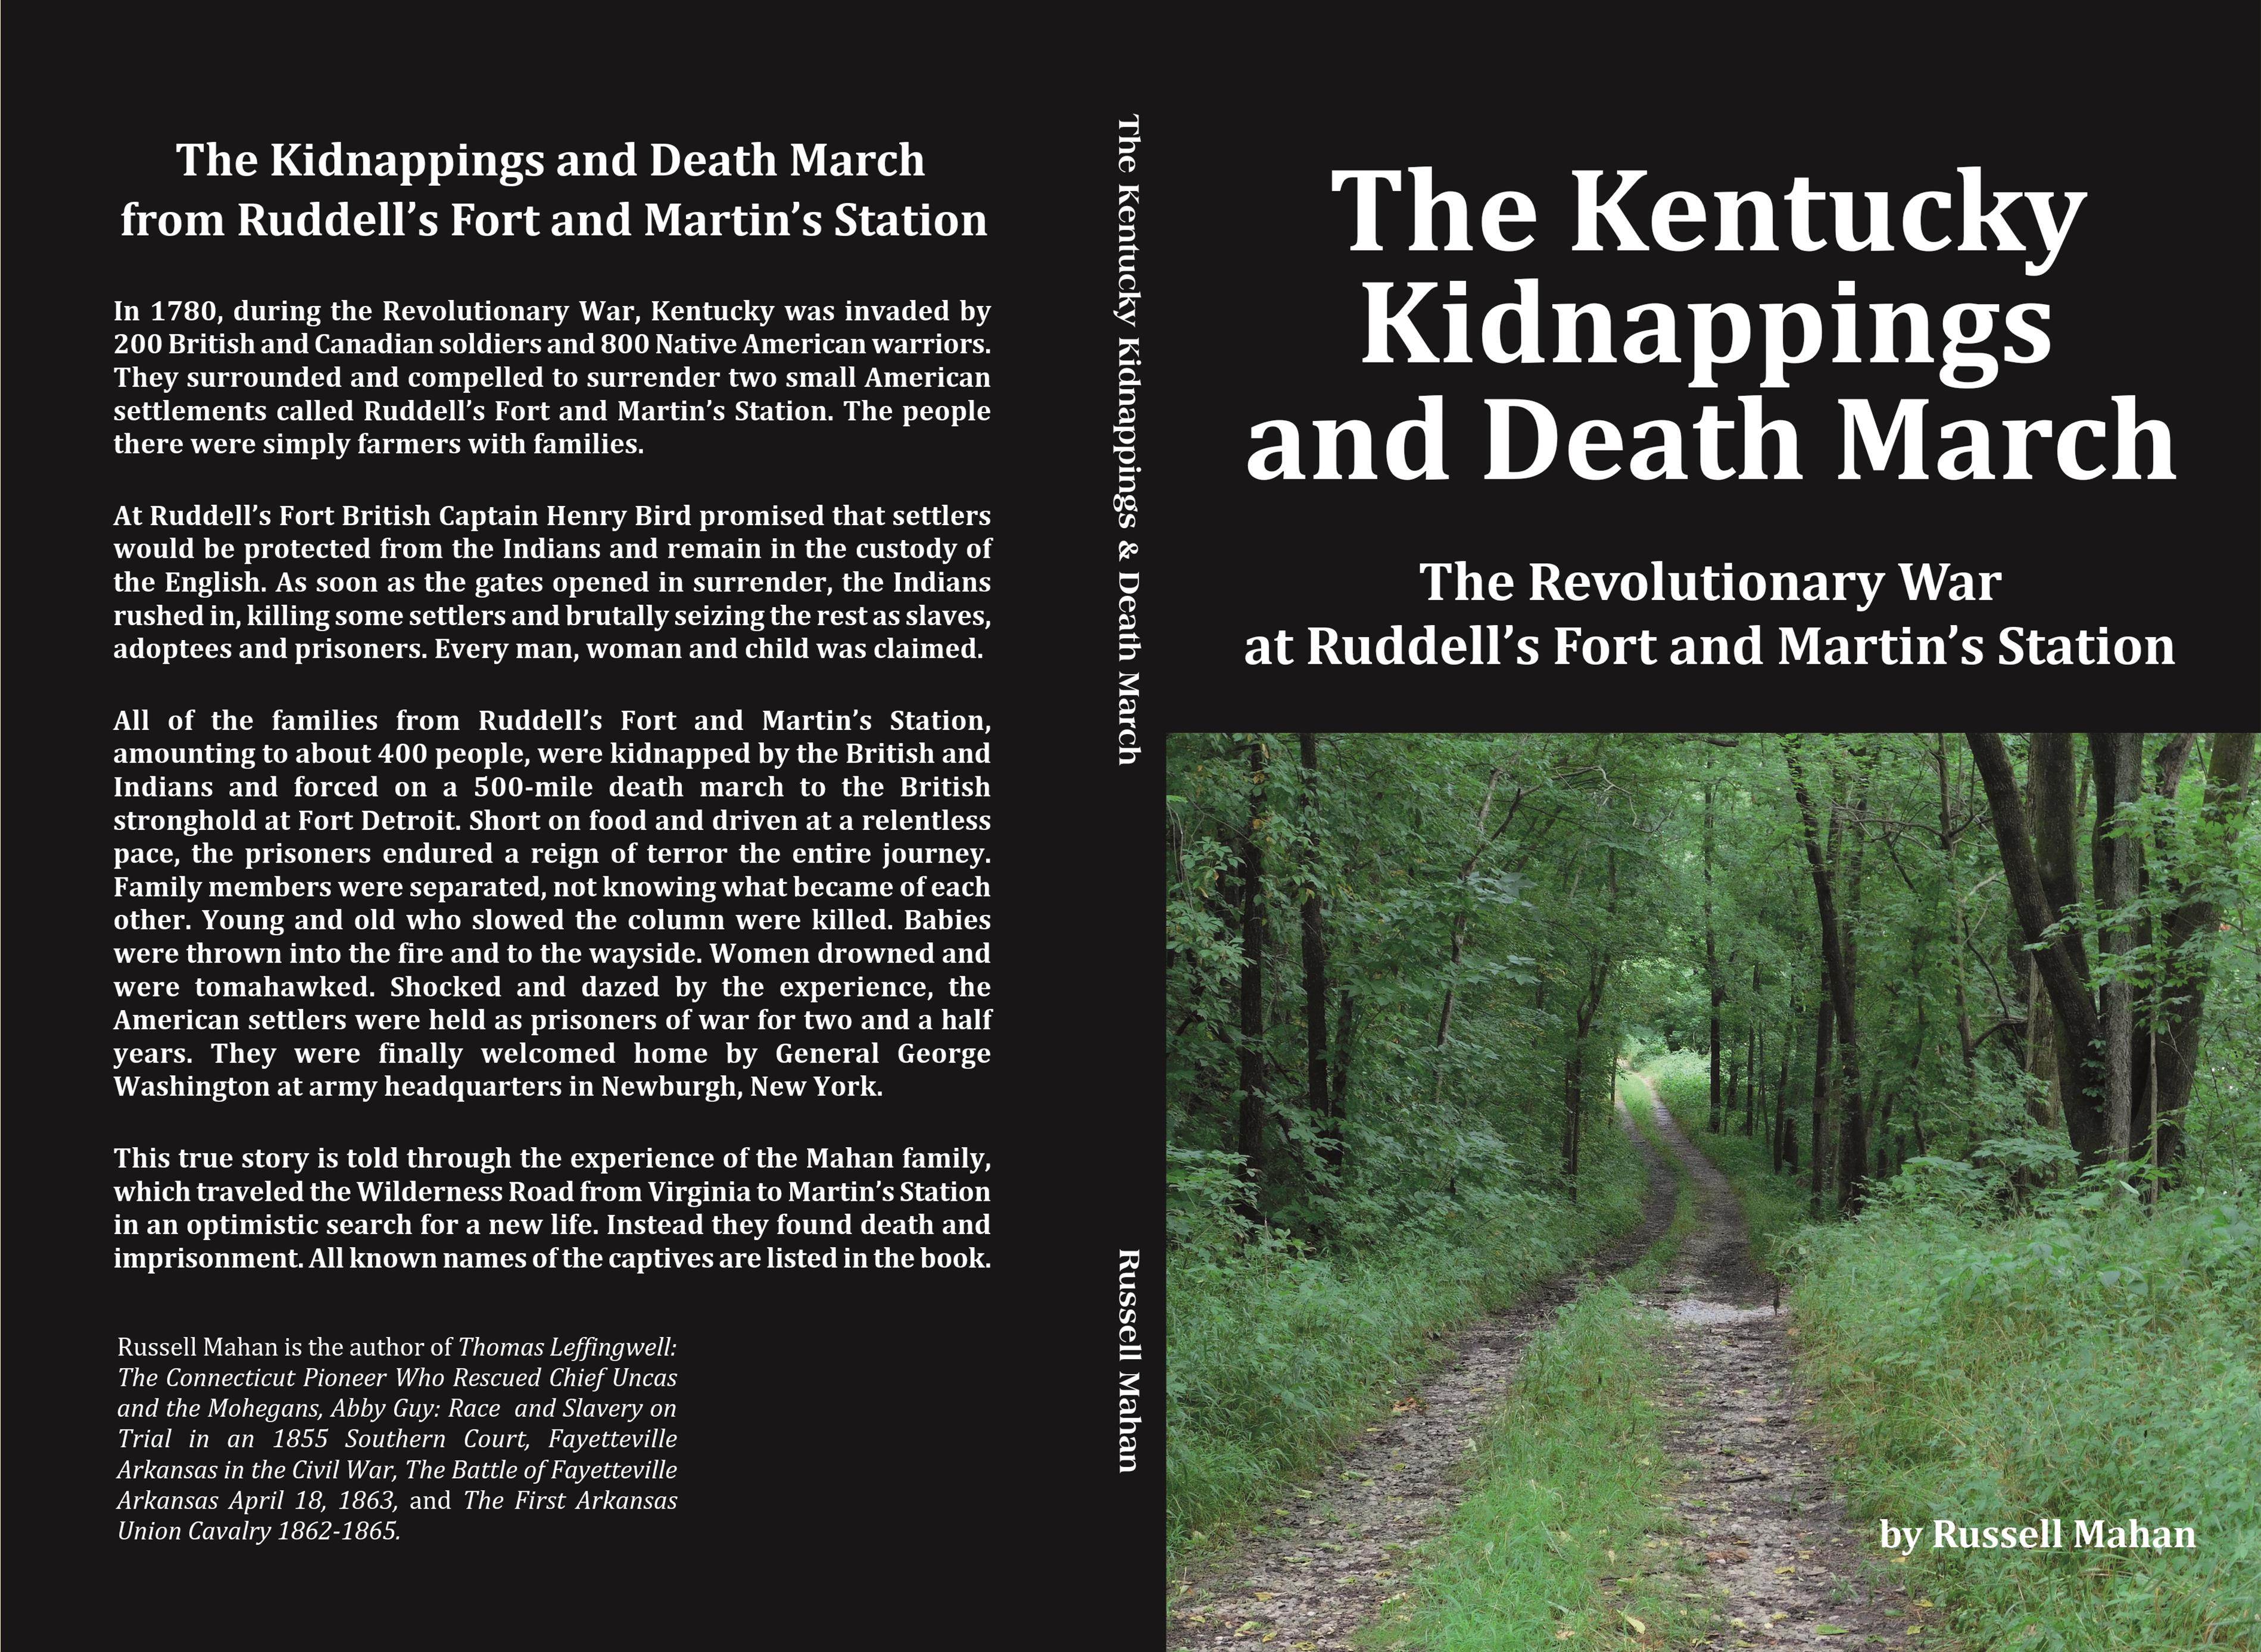 The Kentucky Kidnappings and Death March: The Revolutionary War at Ruddell